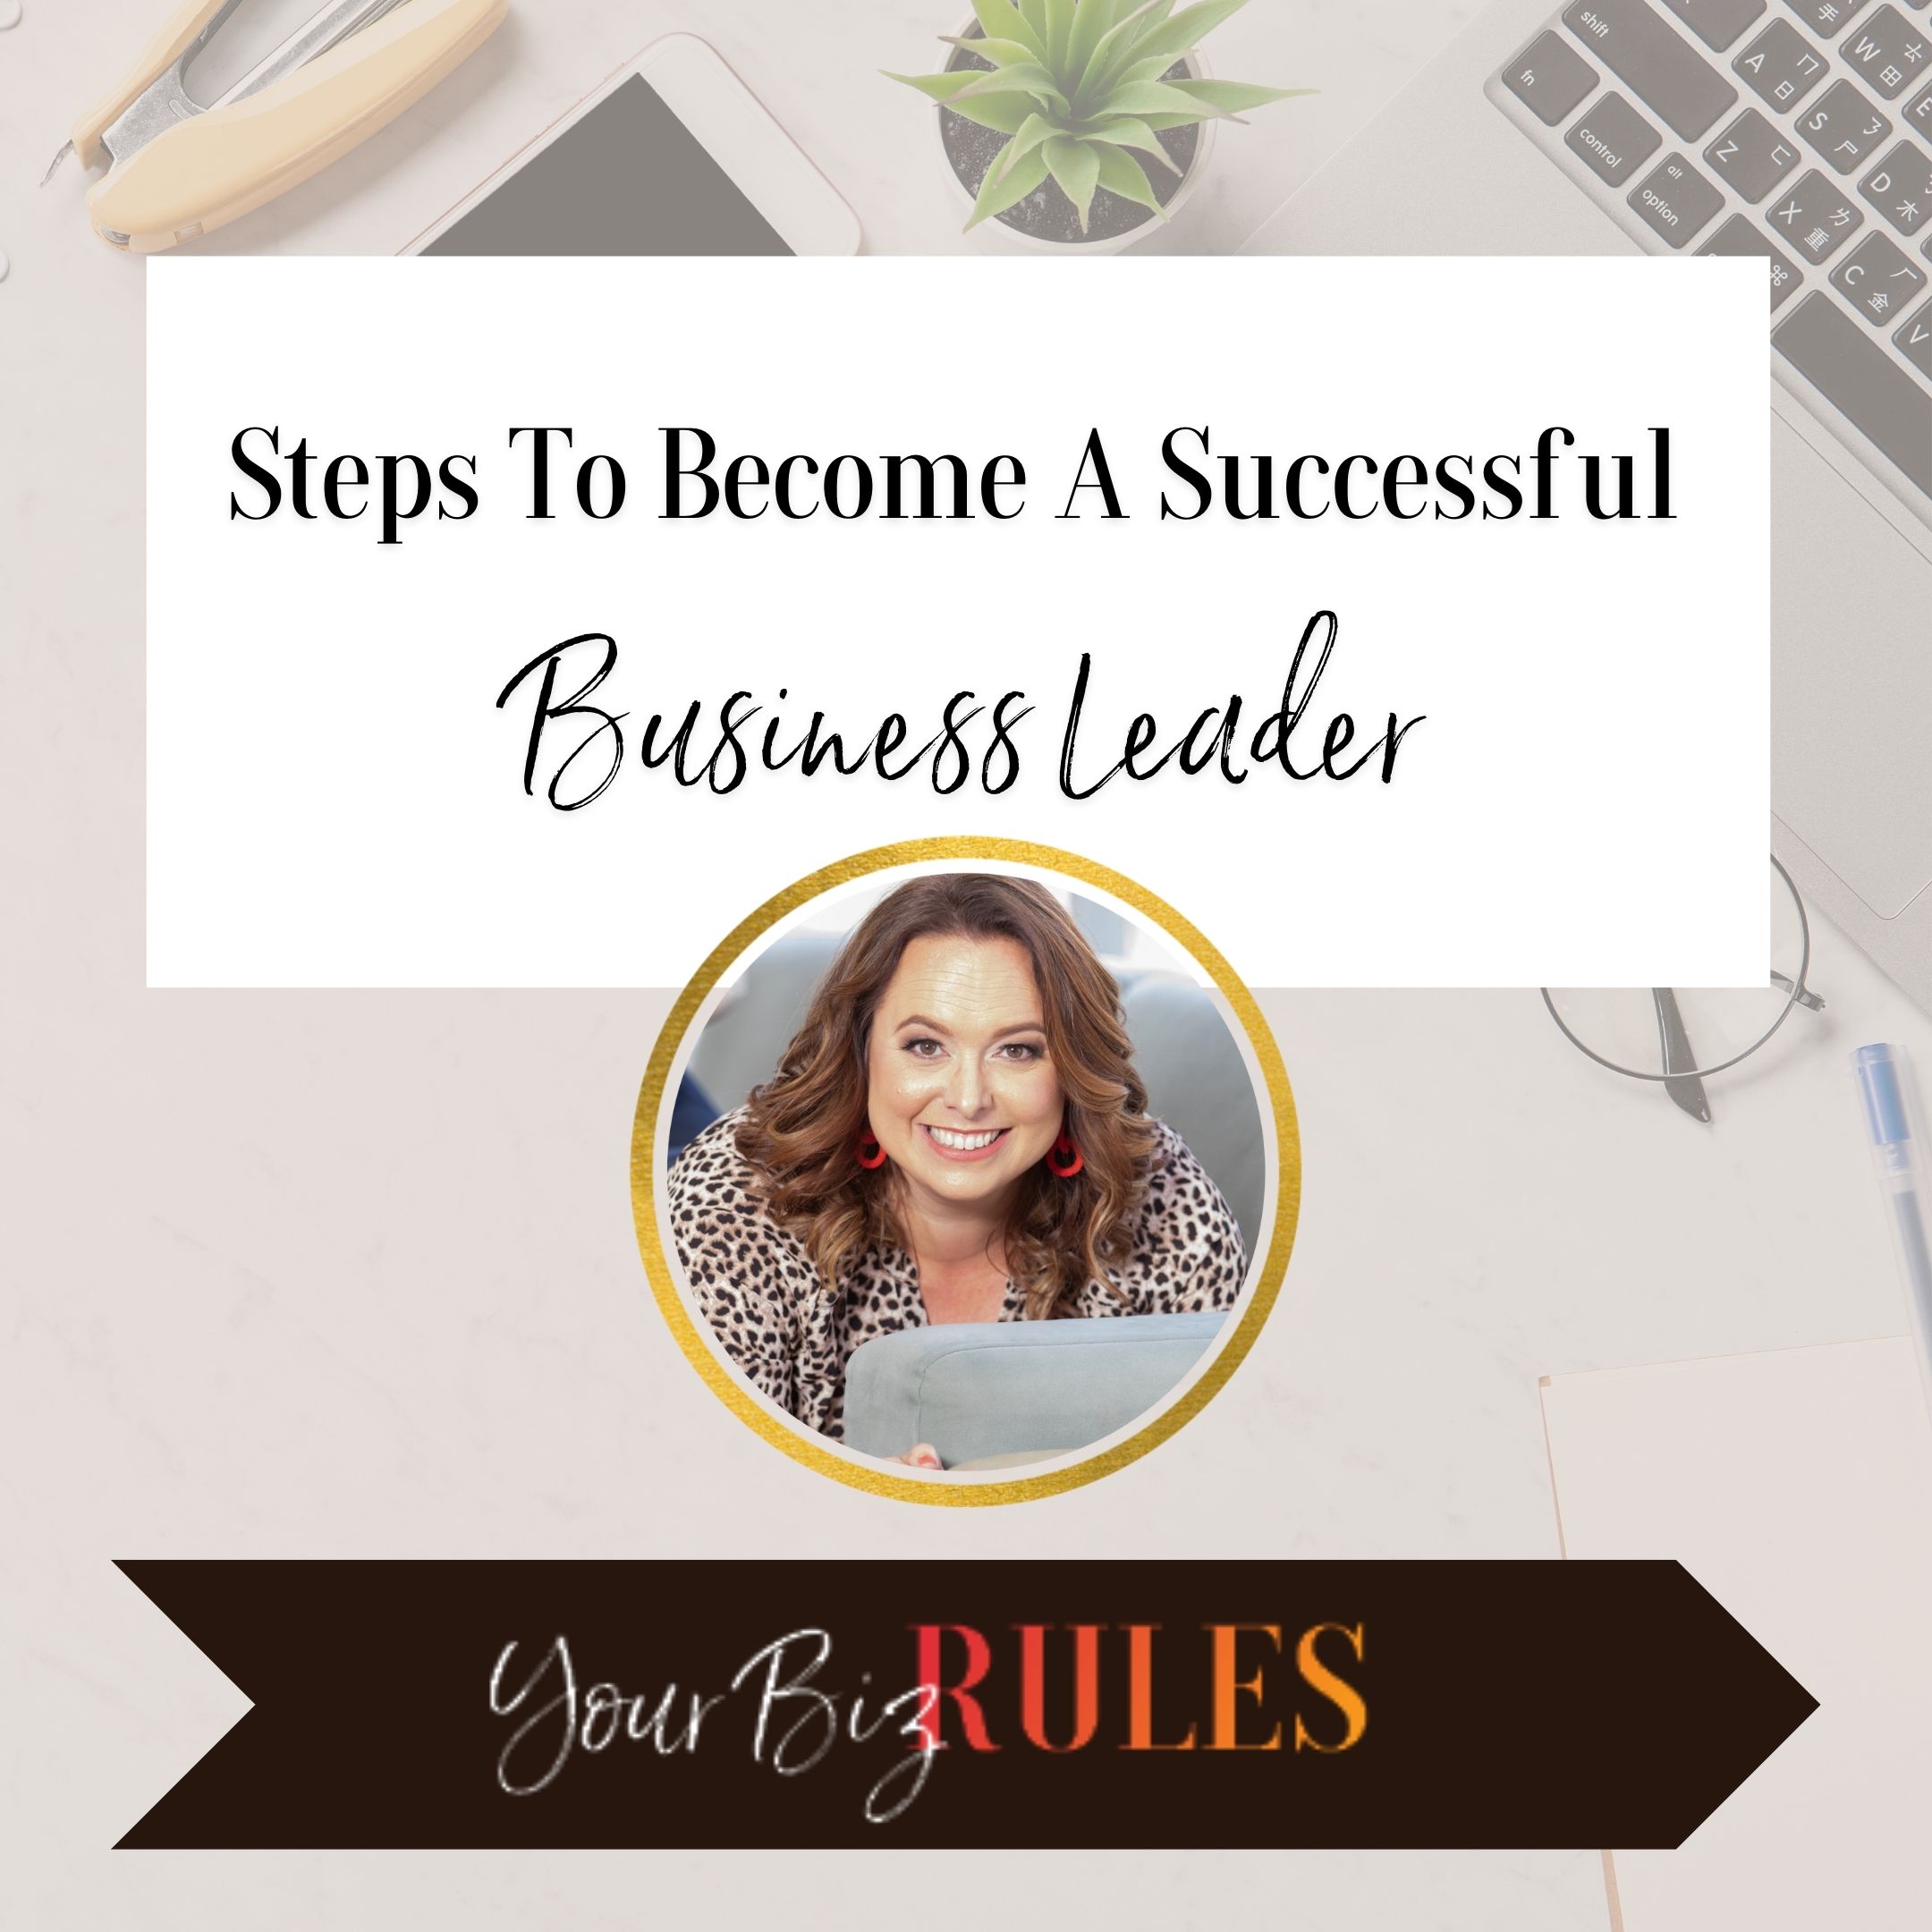 4 Steps To Become A Successful Business Leader 1